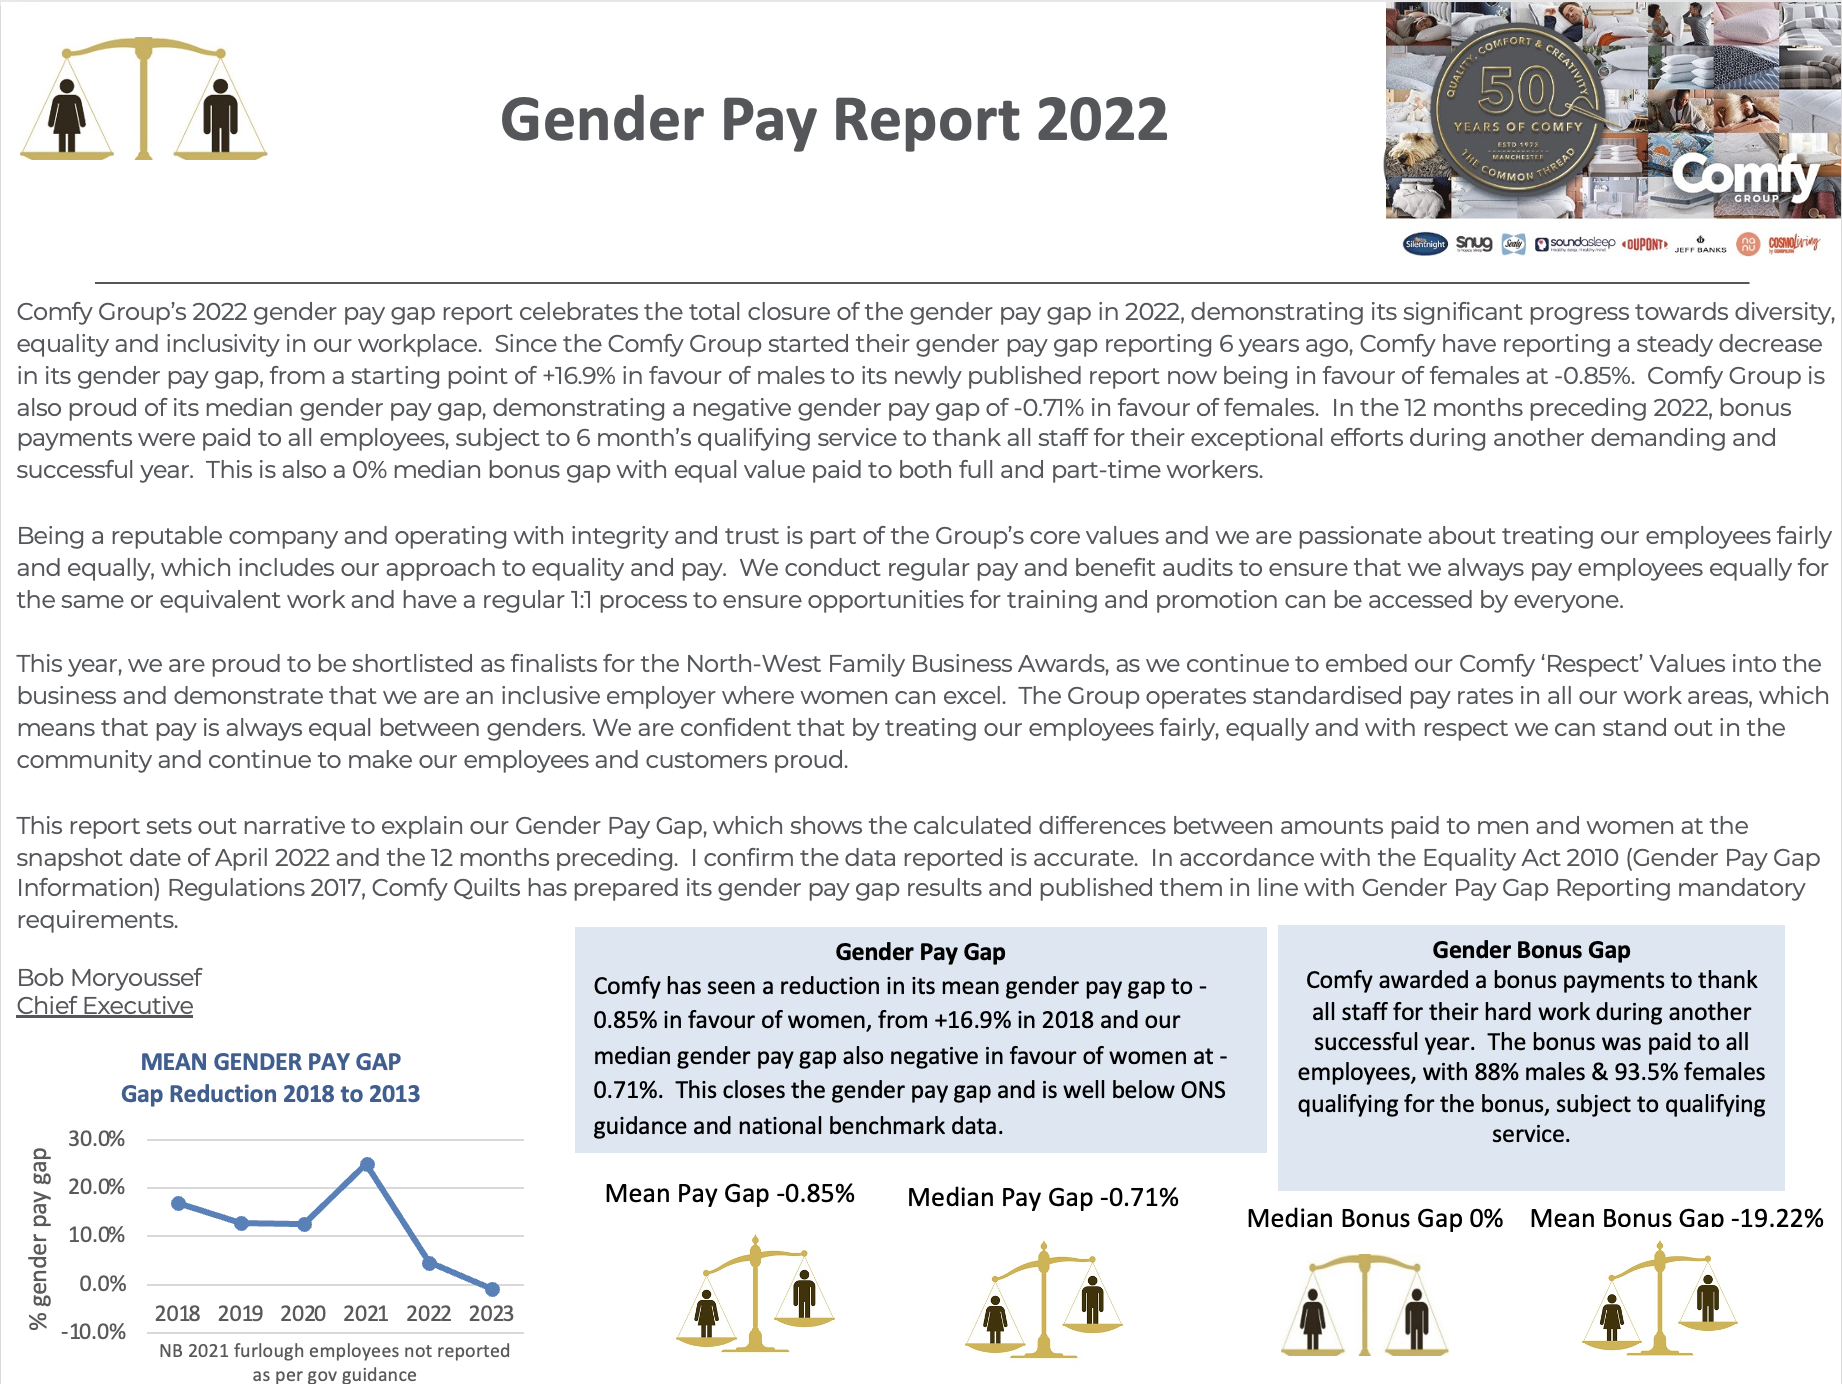 Comfy Group - Gender Pay Gap Report 2022